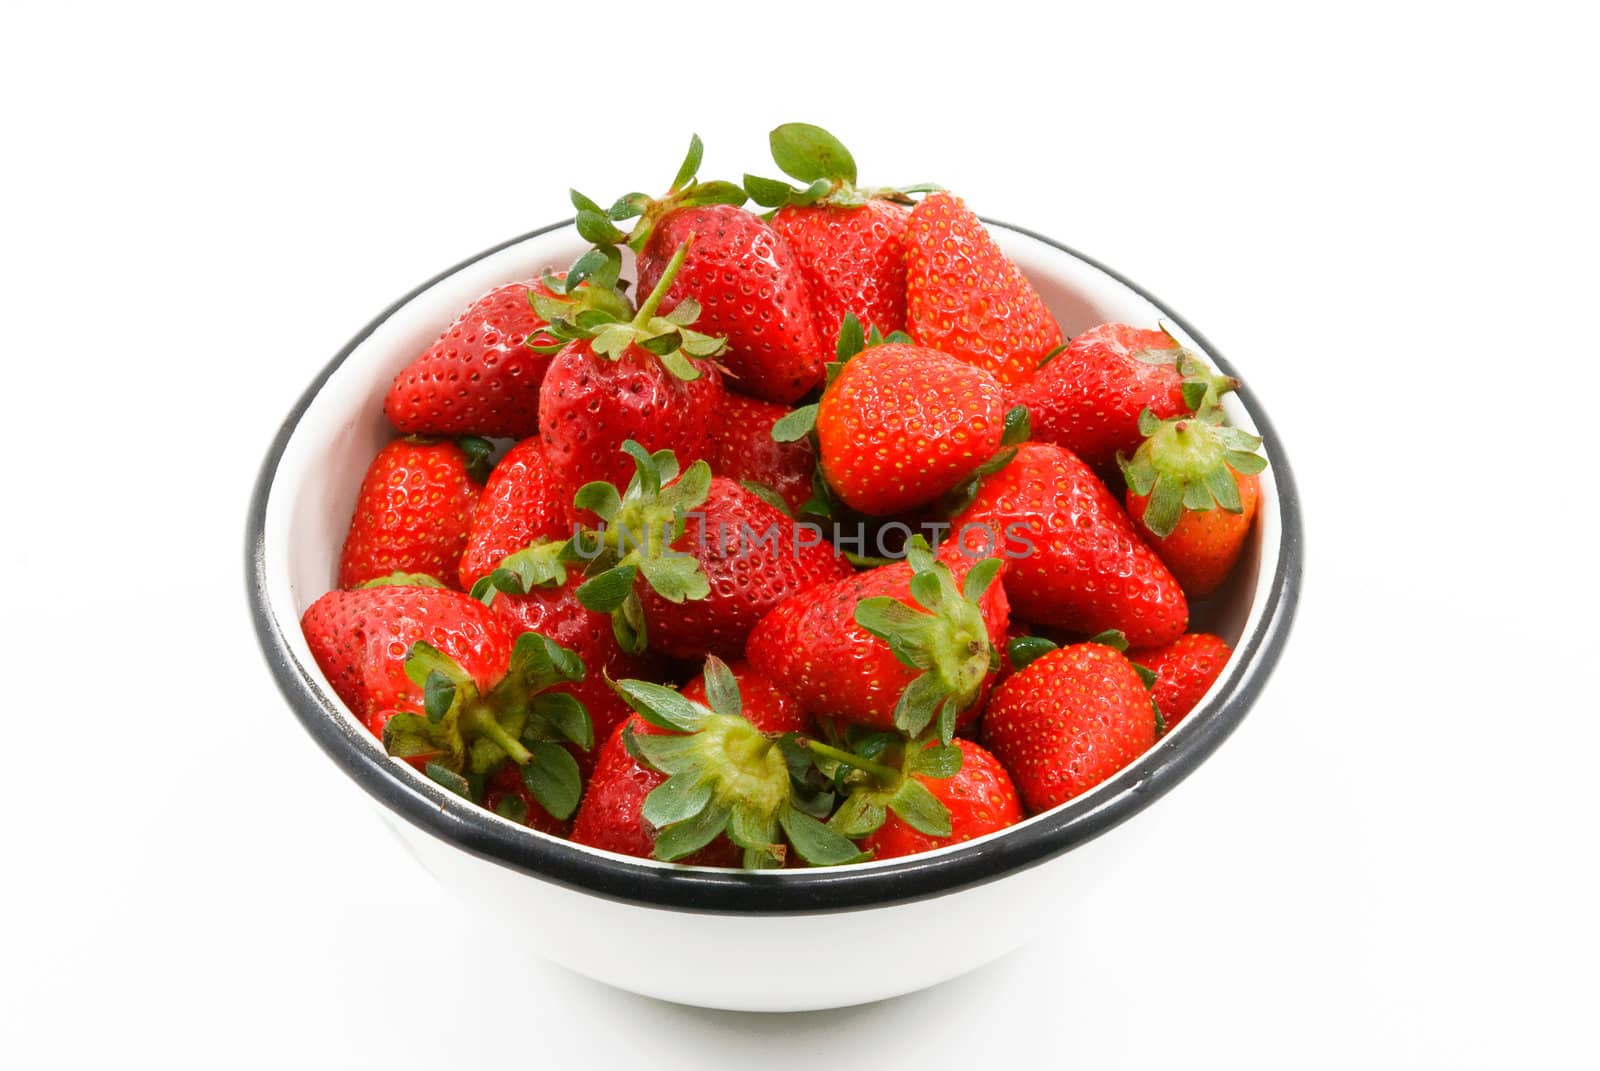 
	
white bowl of fresh strawberries from the garden, on a white background 	 	
